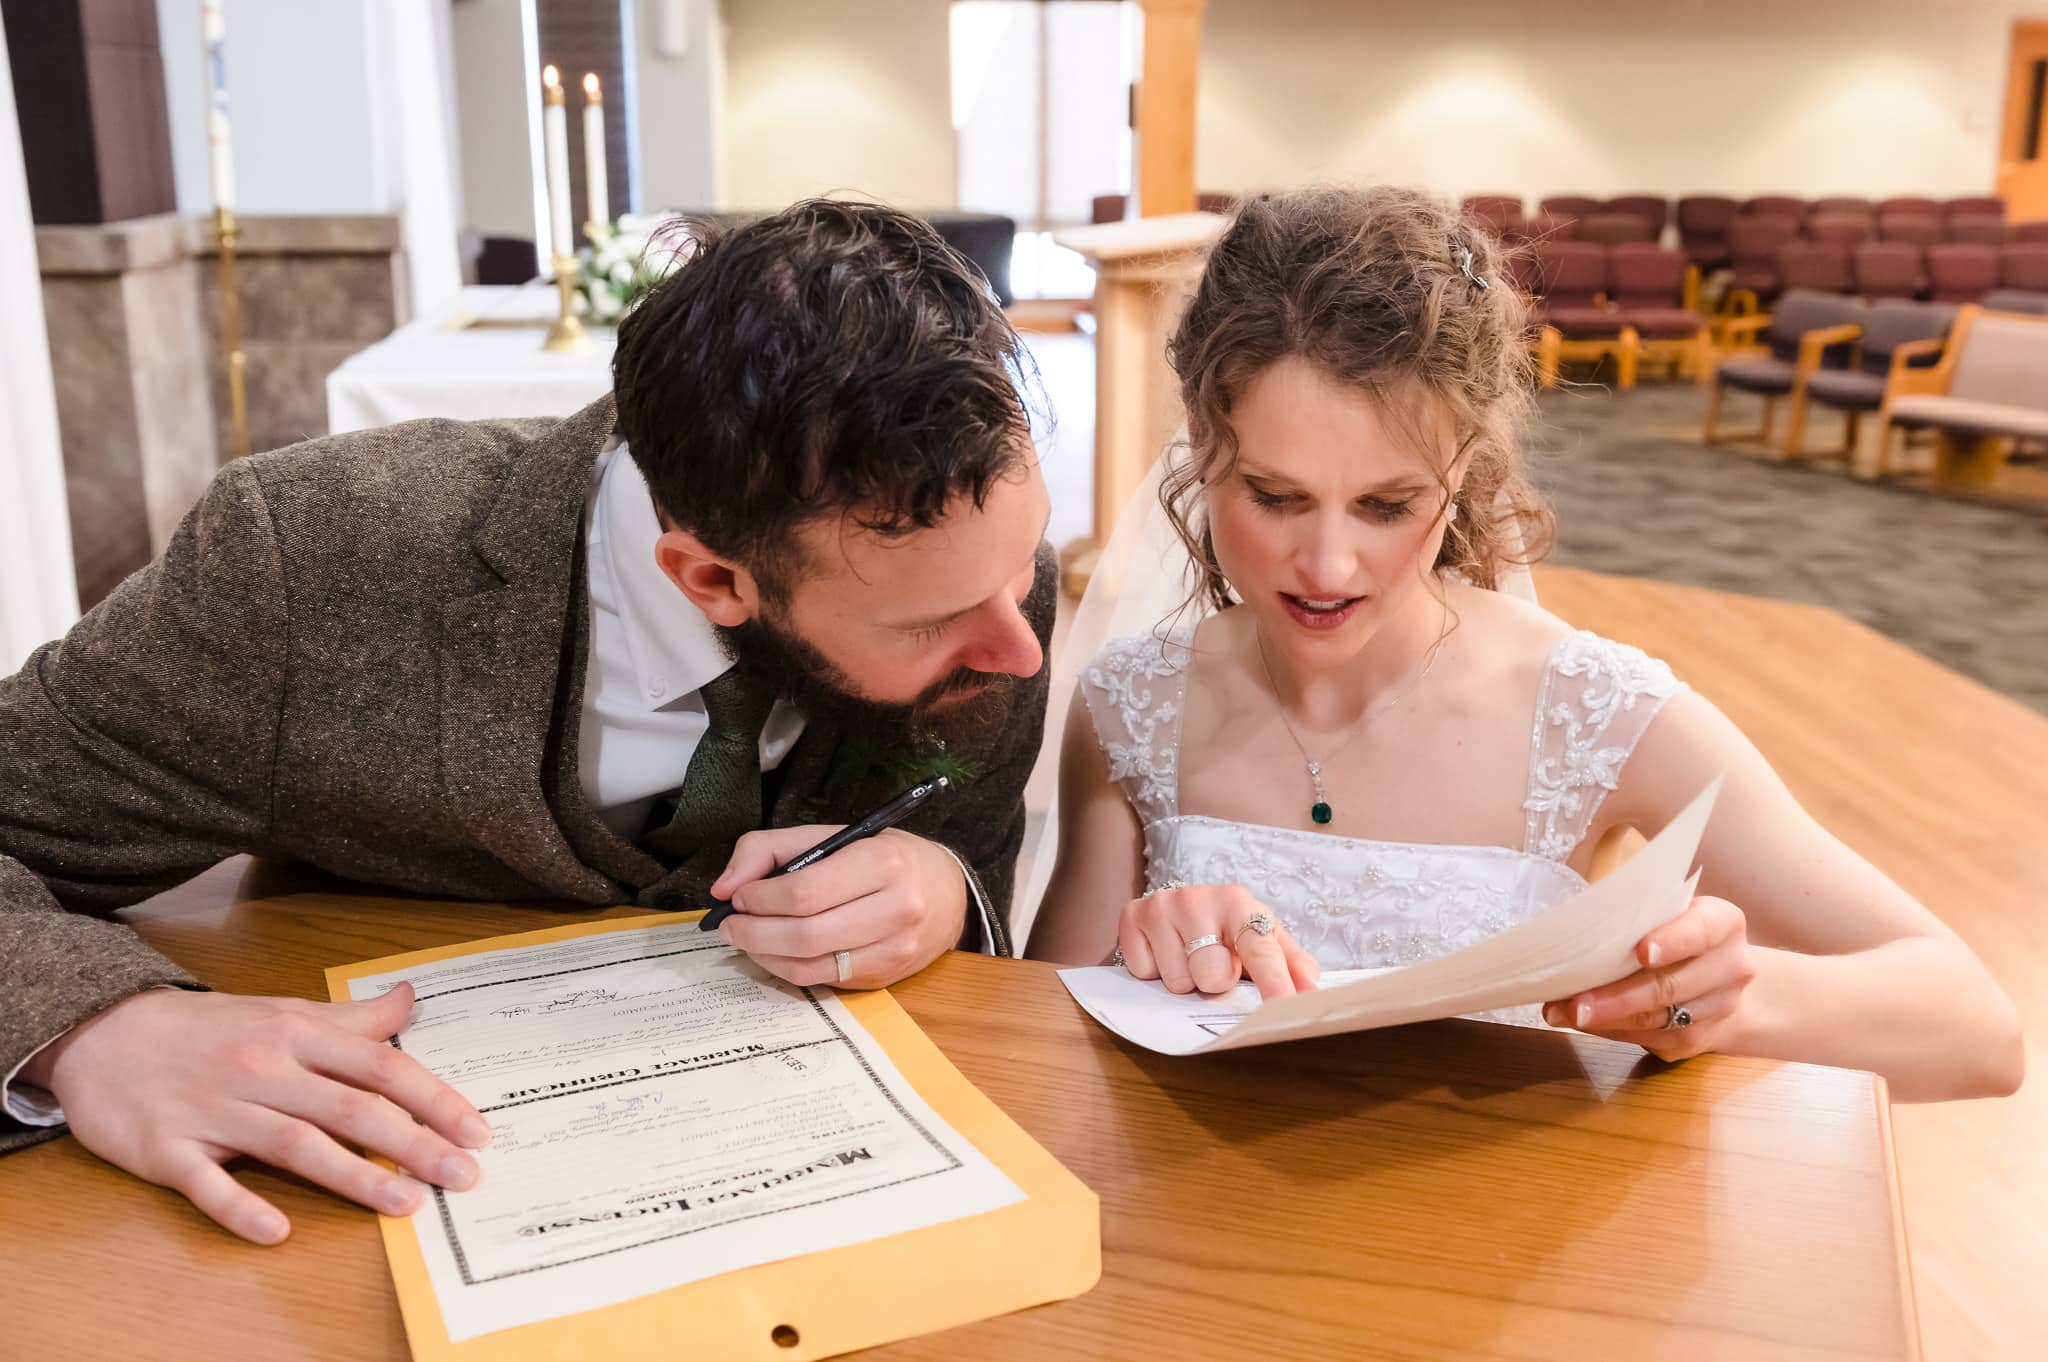 The bride and groom sort out the details on their marriage license before signing it.